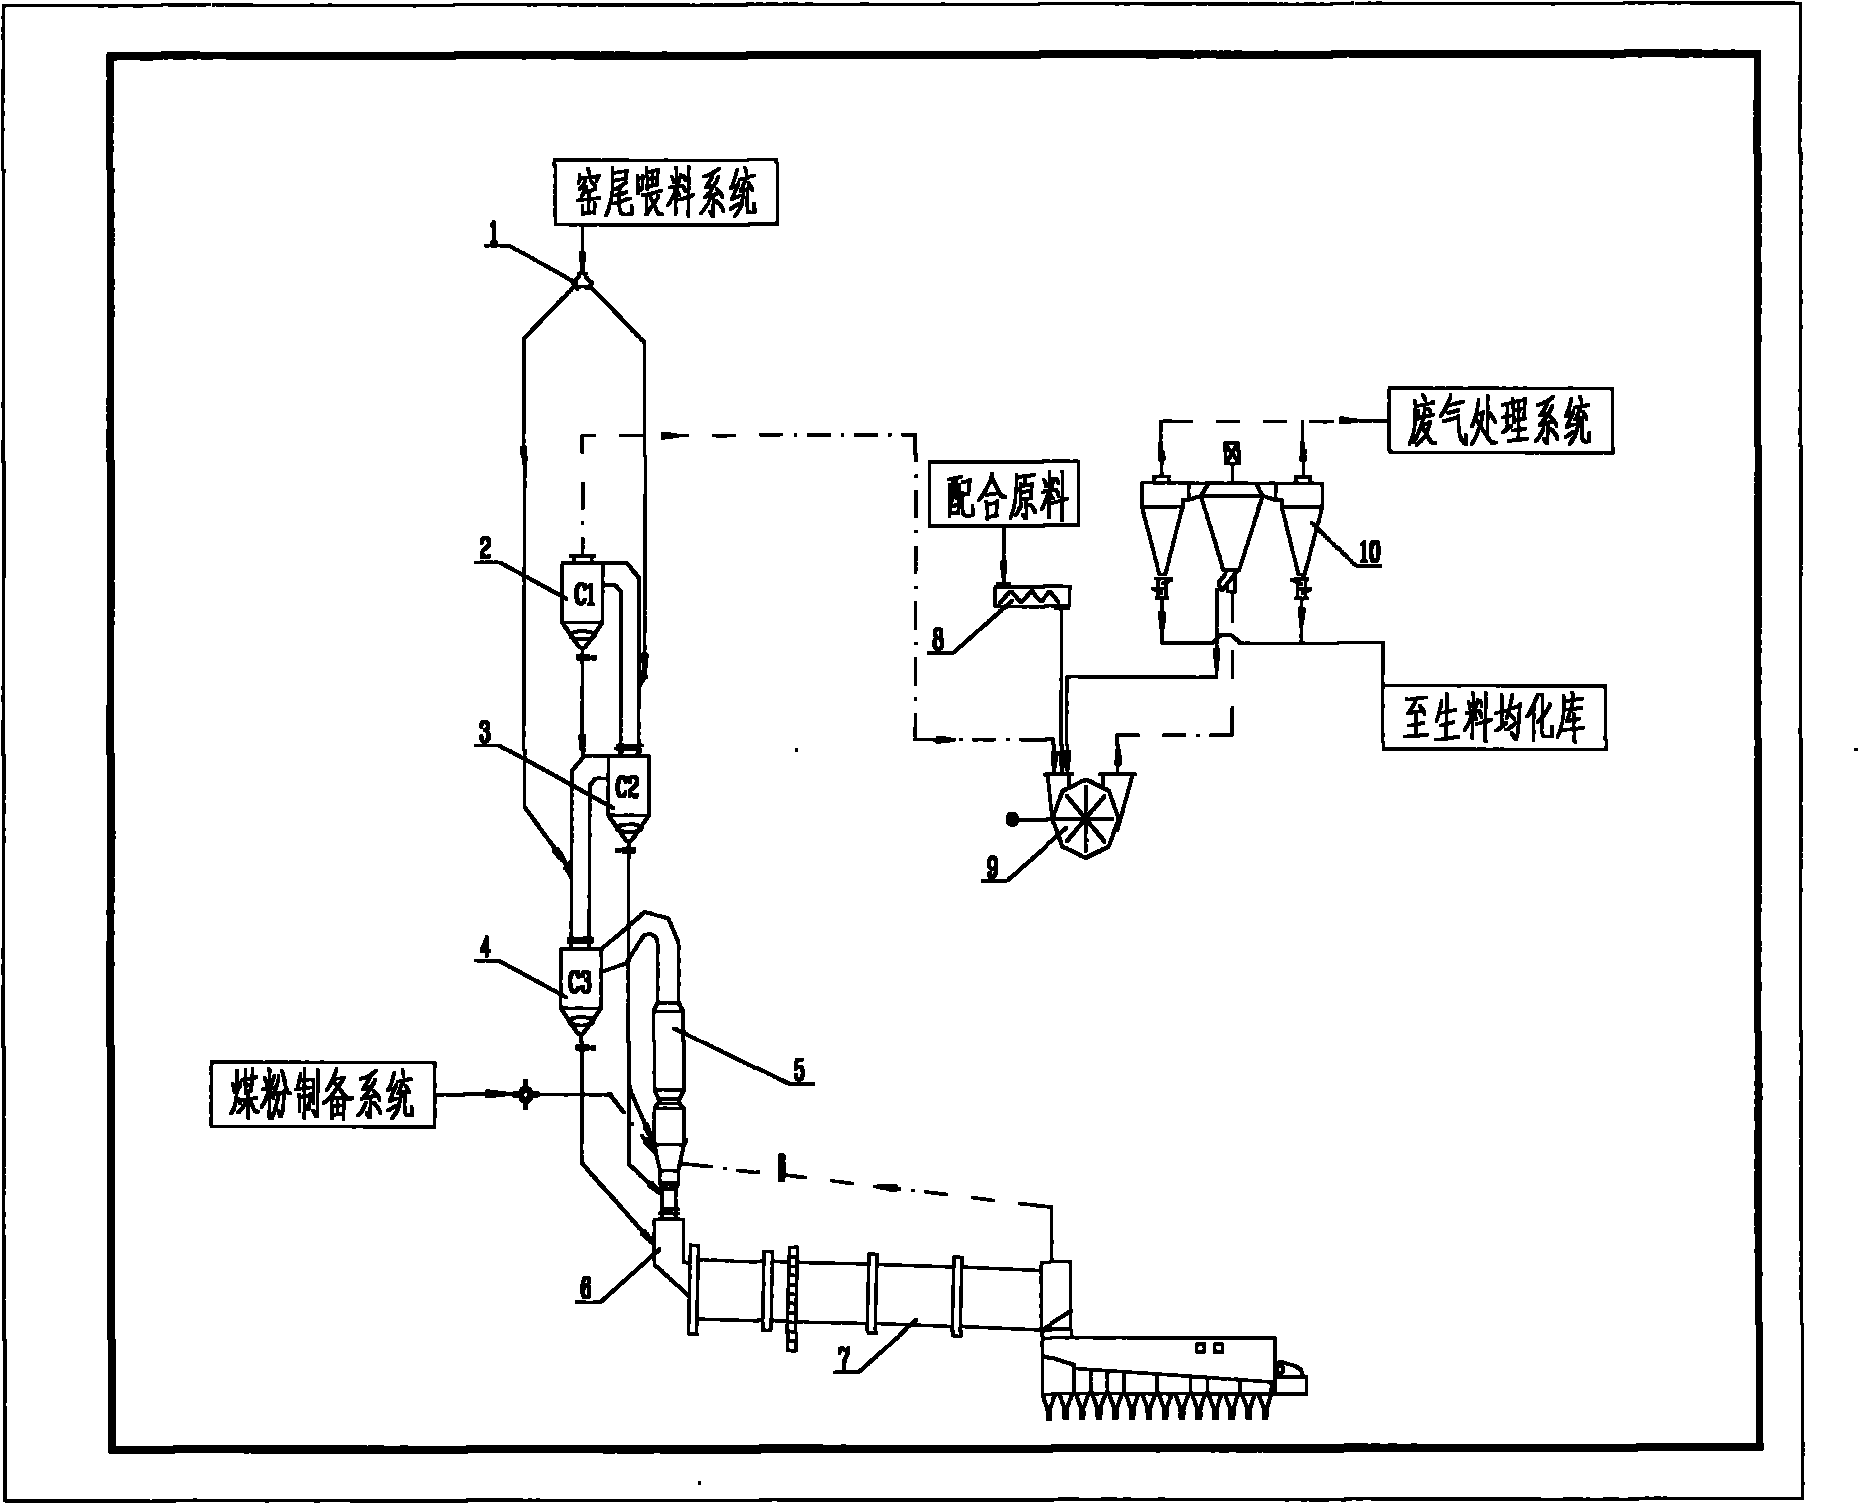 Method for producing cement clinker by calcining chalk